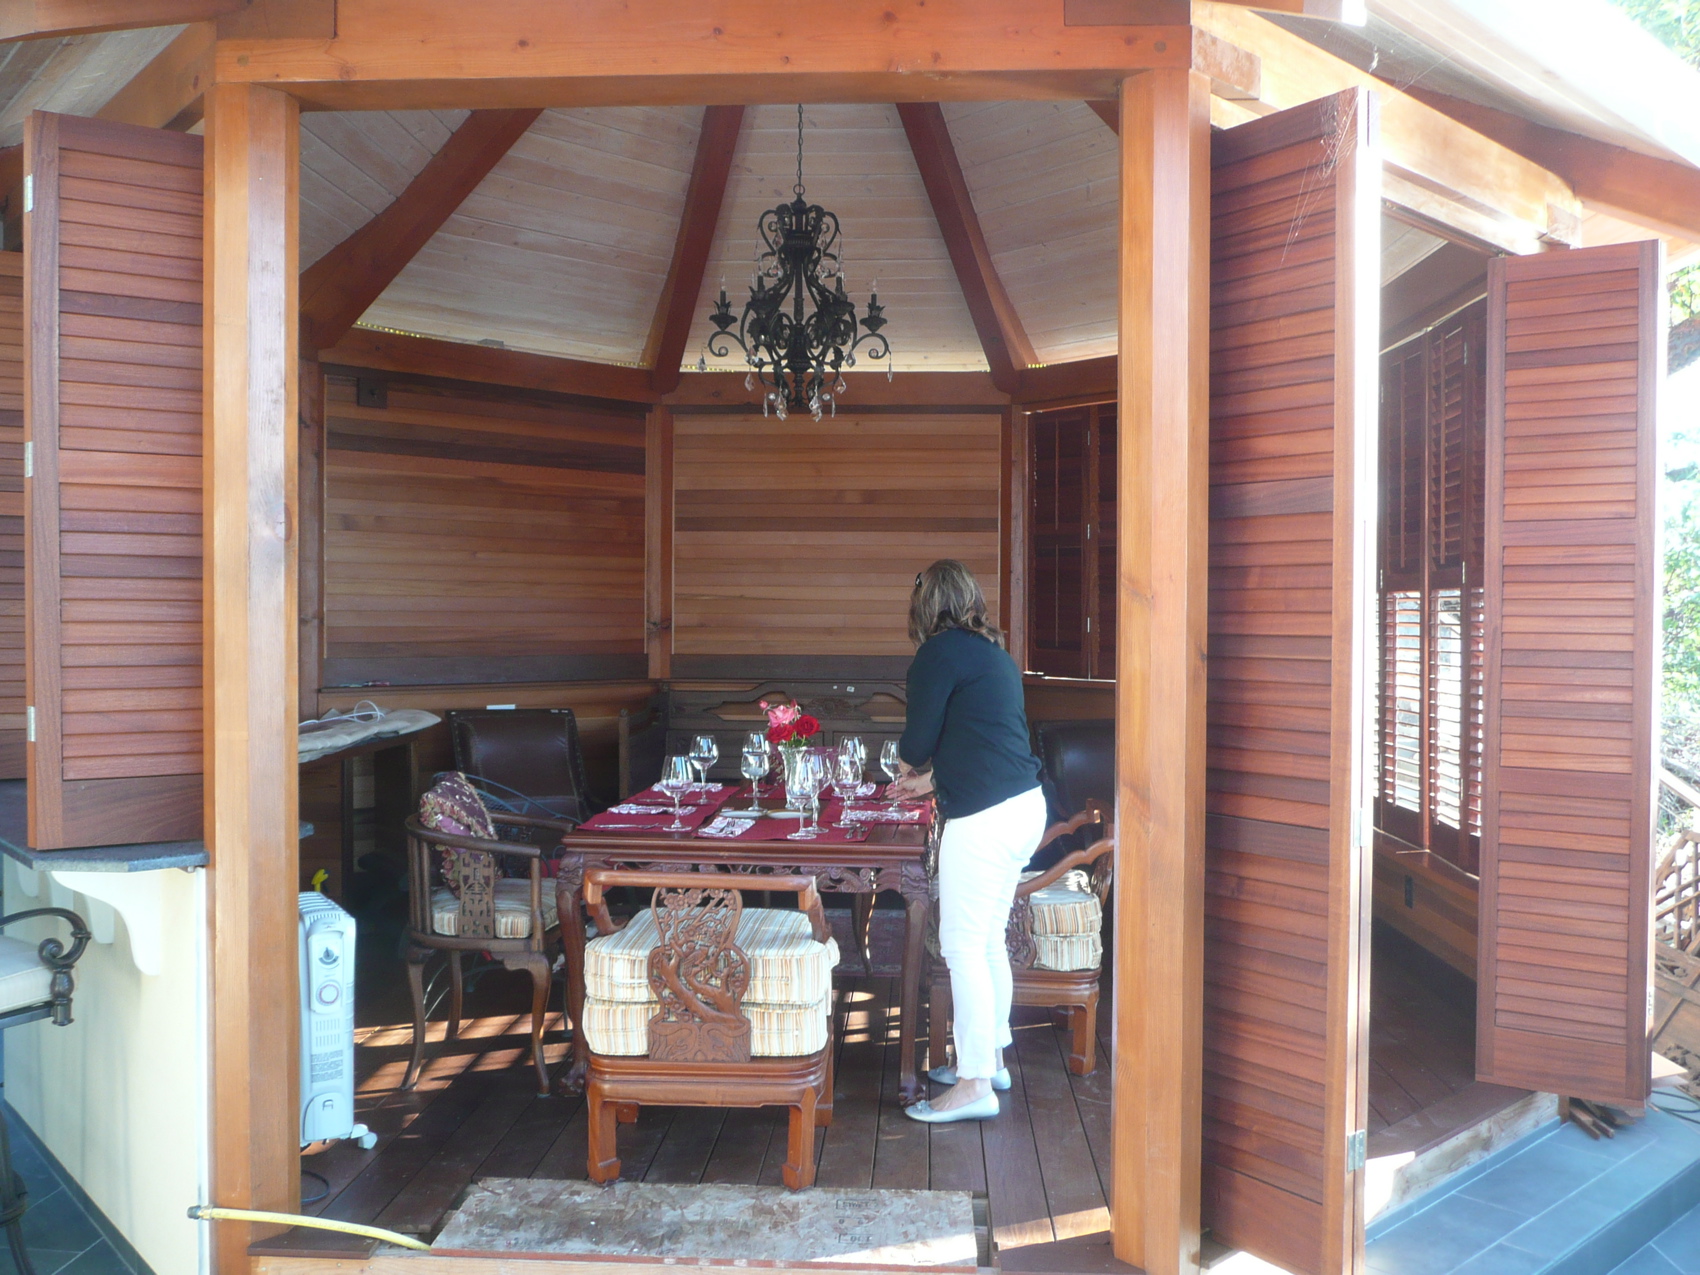 Shutters and Doors to enclose a gazebo